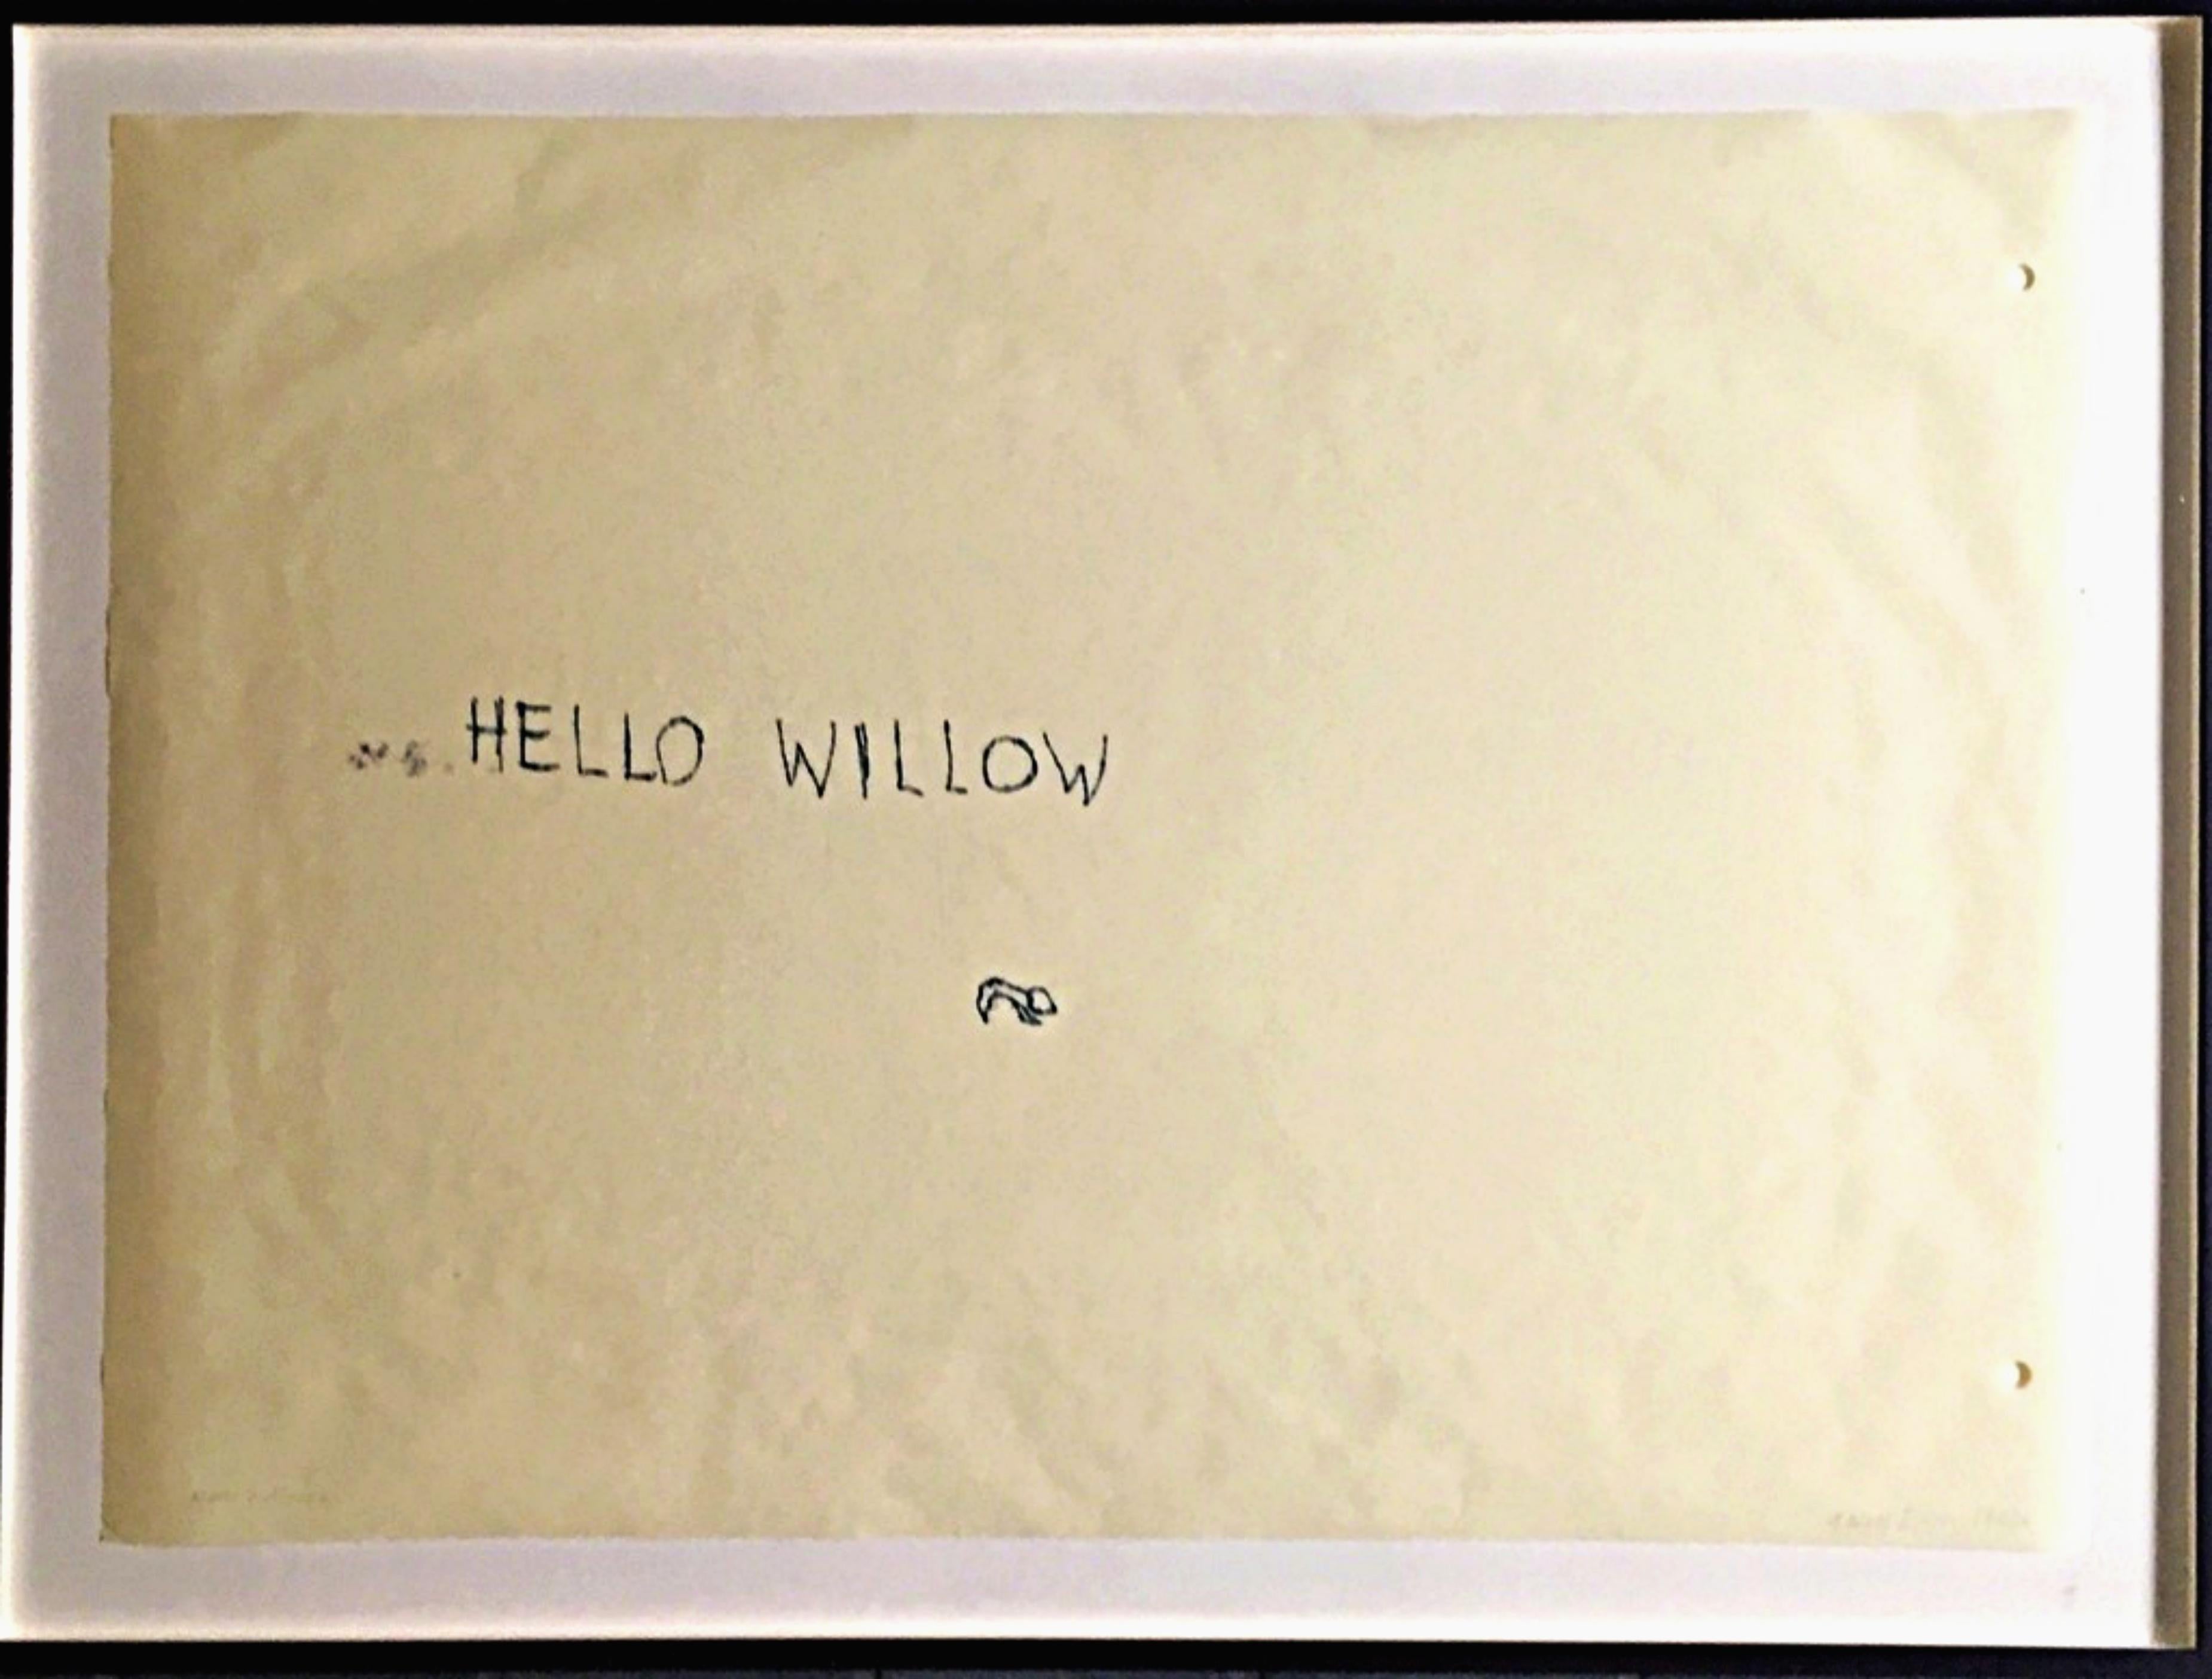 Hello Willow, signed monotype (unique), from the Tim Hunt and Tama Janowitz sale